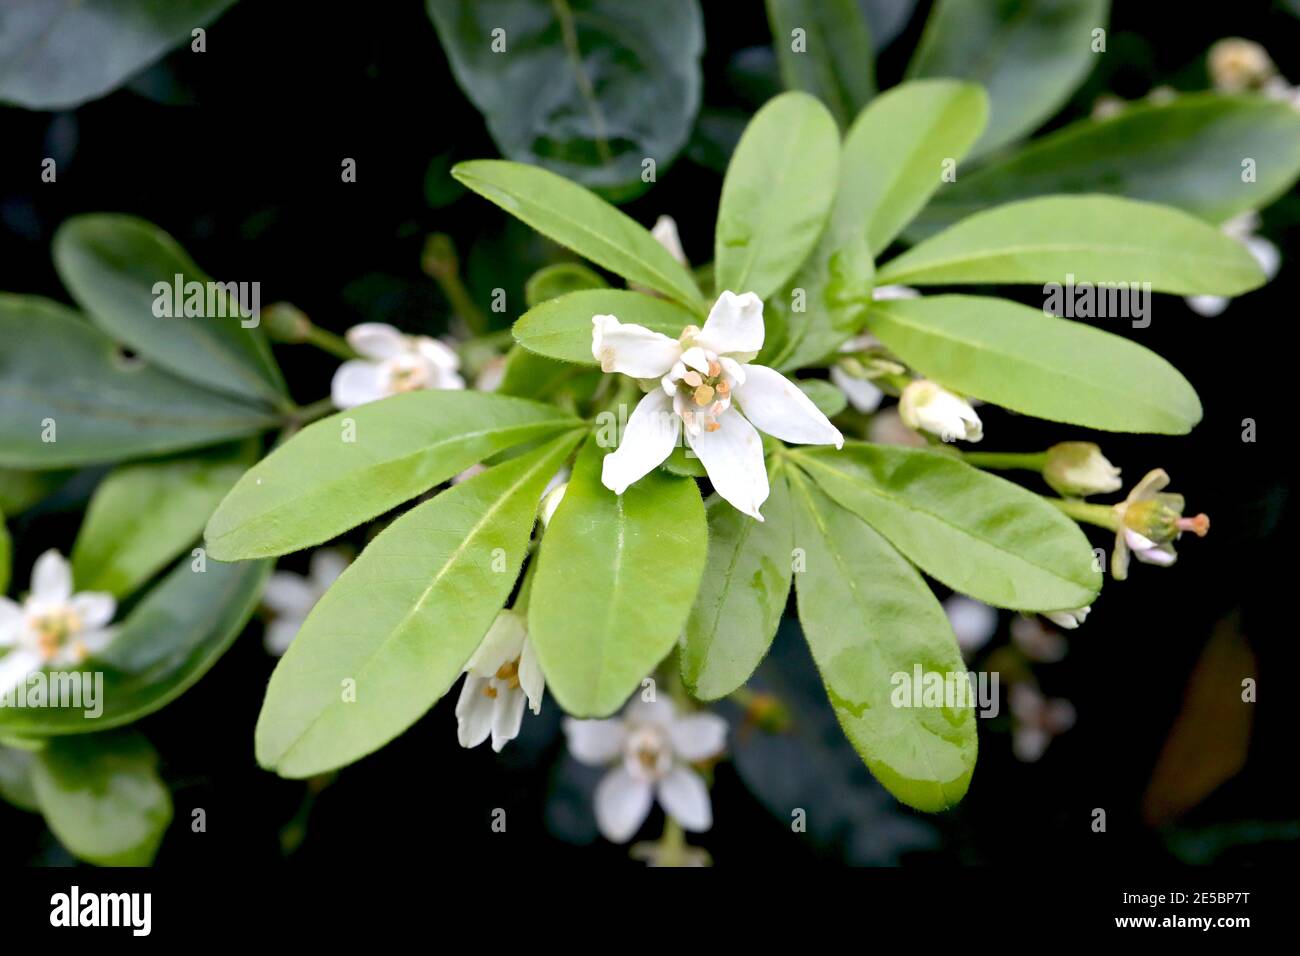 Choisya ternata Mexican orange blossom – scented clusters of white star-shaped flowers and mid green oblong leaves,  January, England, UK Stock Photo